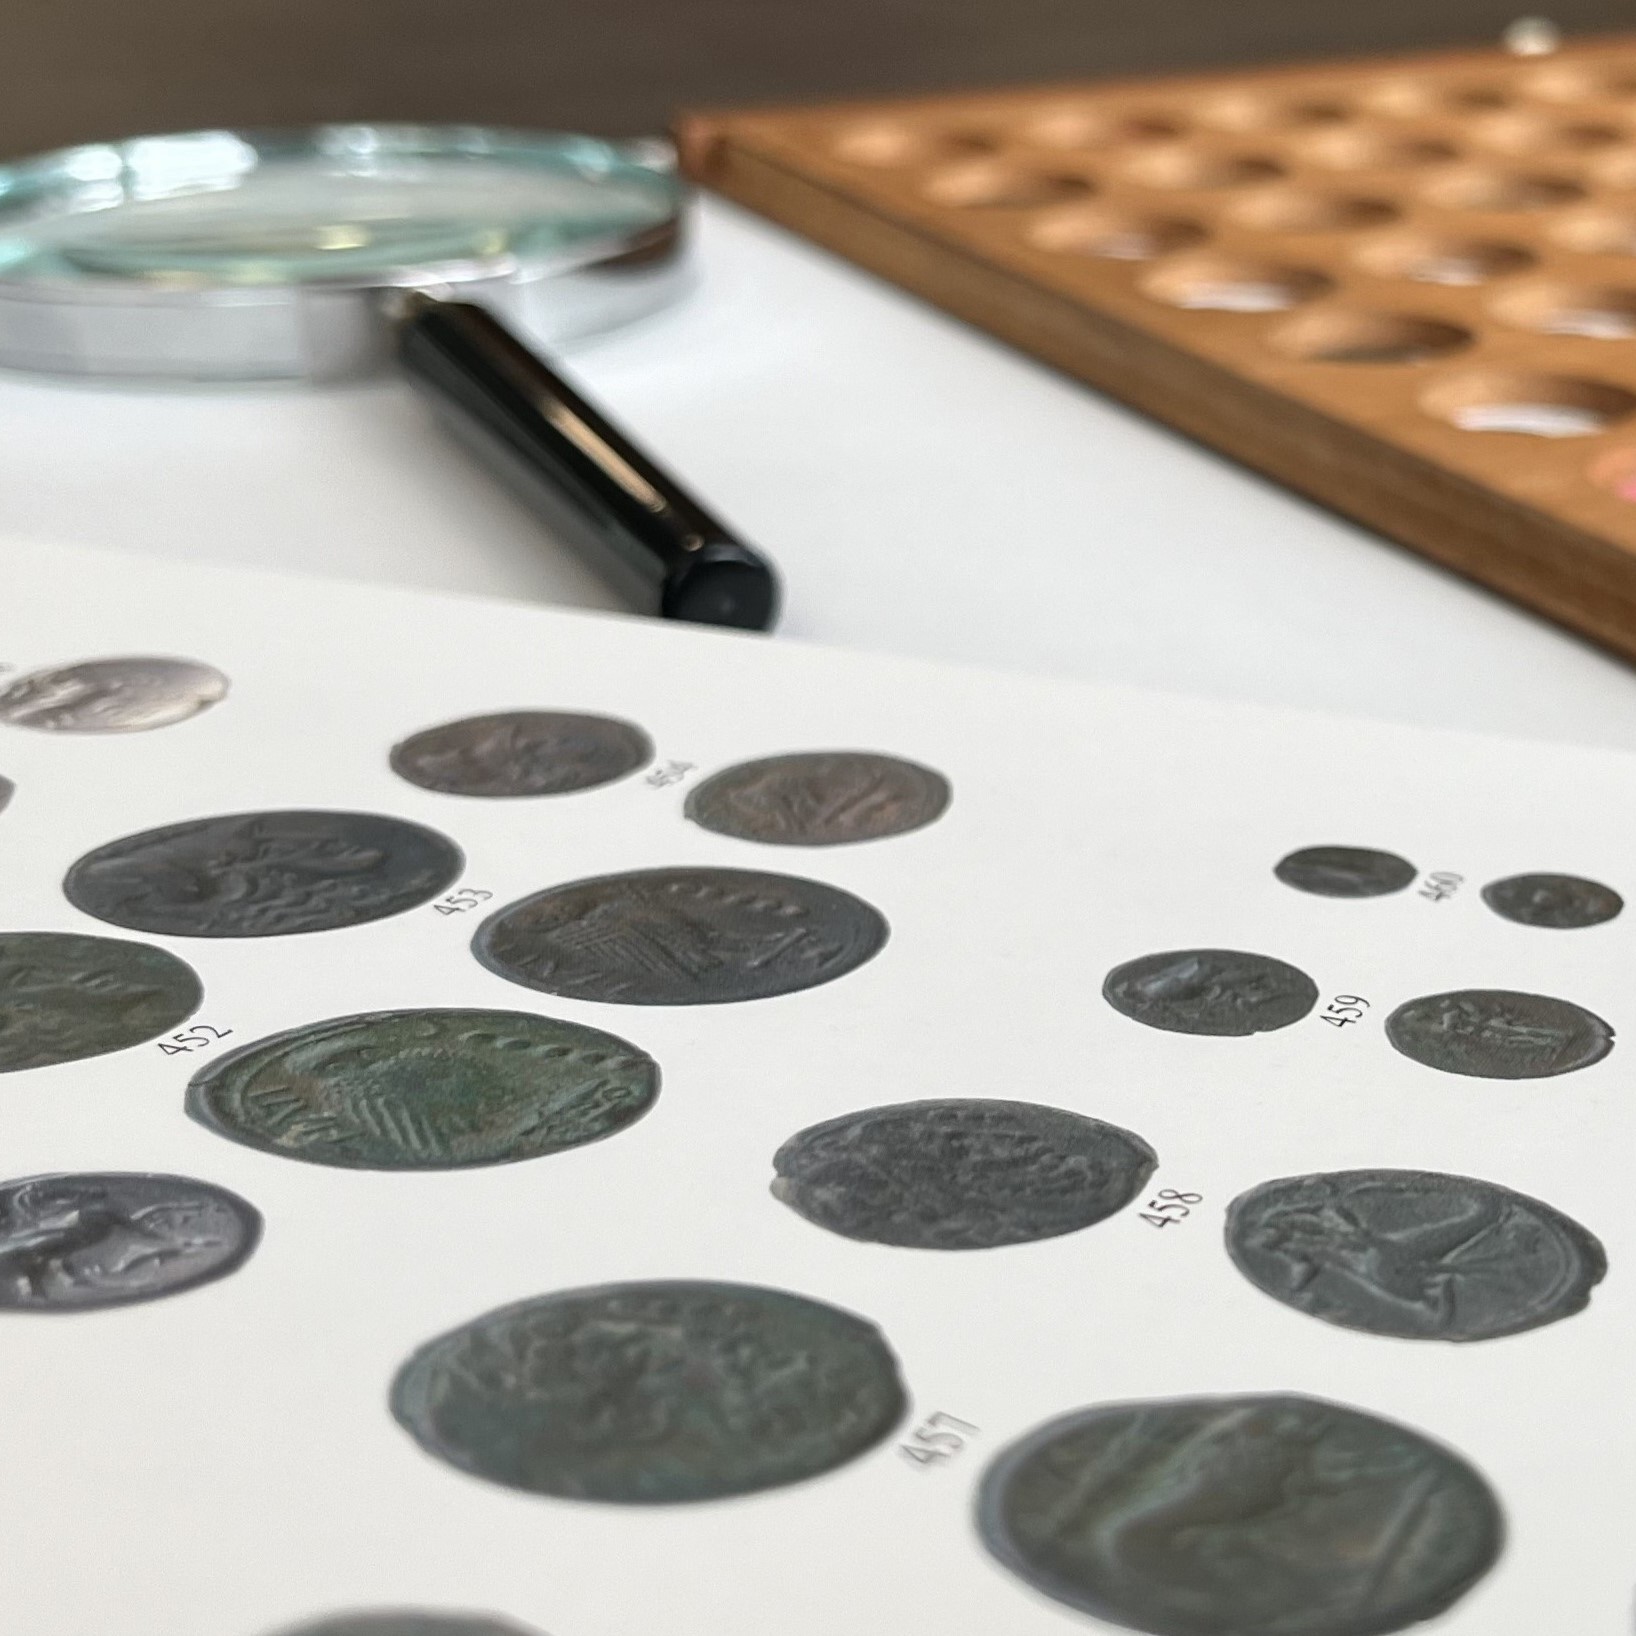 Magnifying glass resting on a book with images of coins